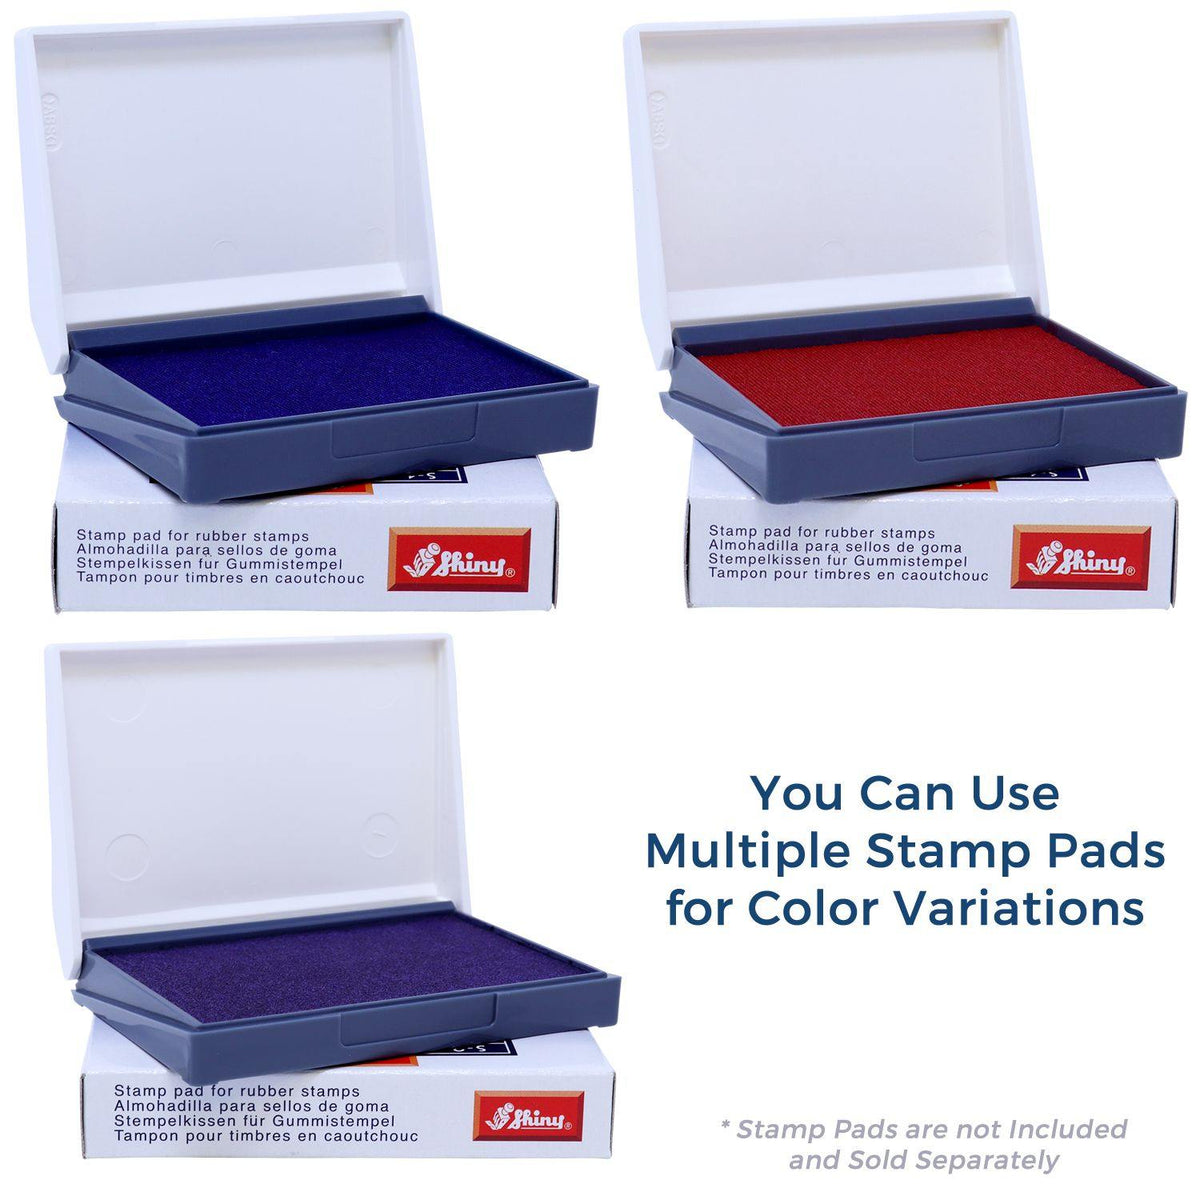 Stamp Pads for Large Retained Rubber Stamp Available